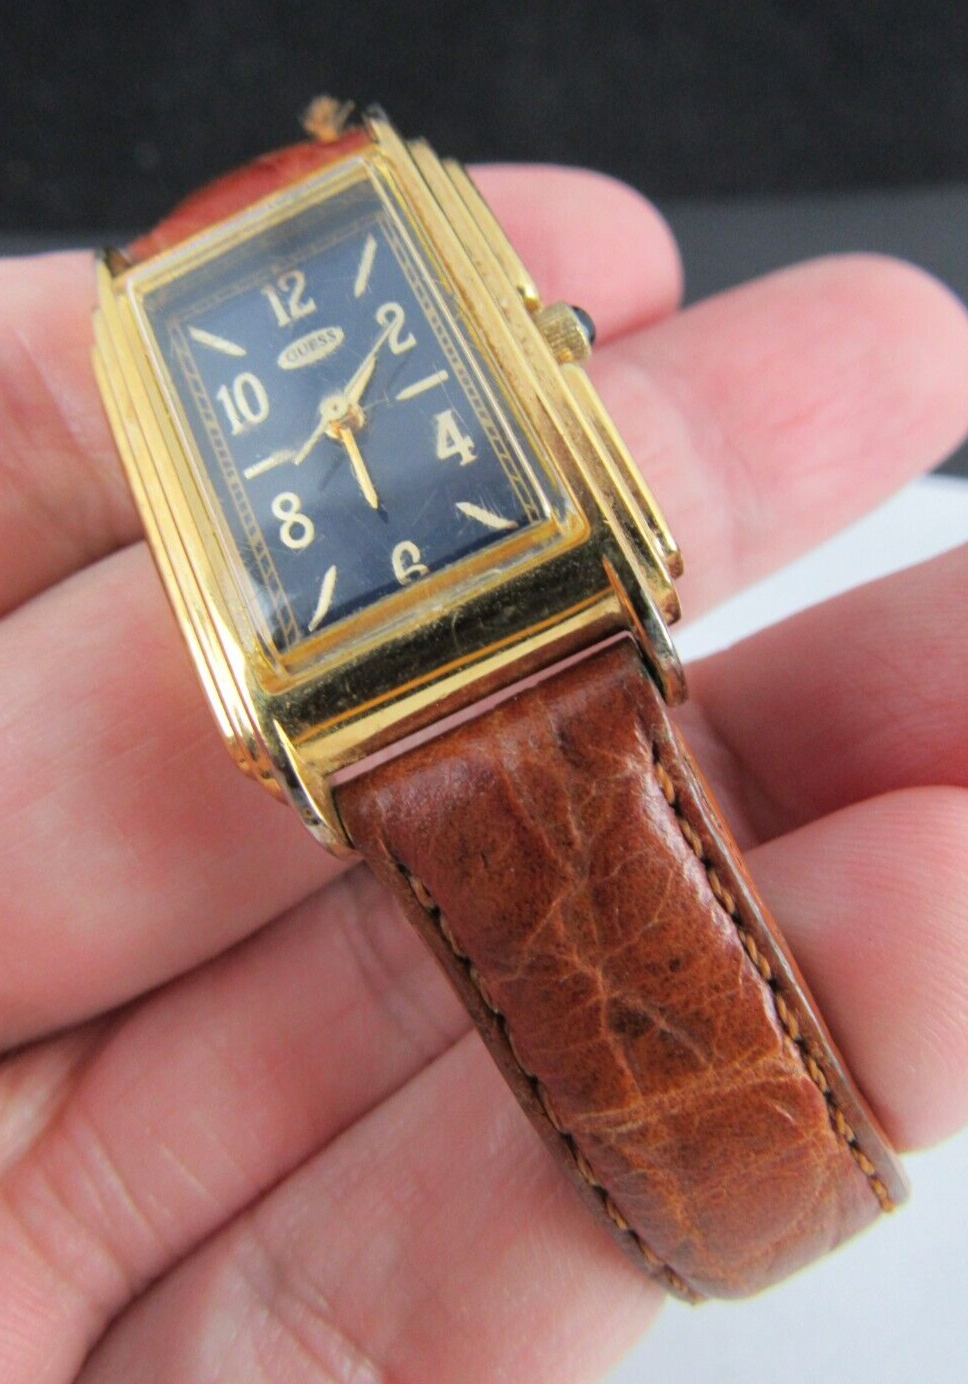 Primary image for 1993 GUESS WATCH ladies GENUINE LEATHER blue face gold tone WORKS!